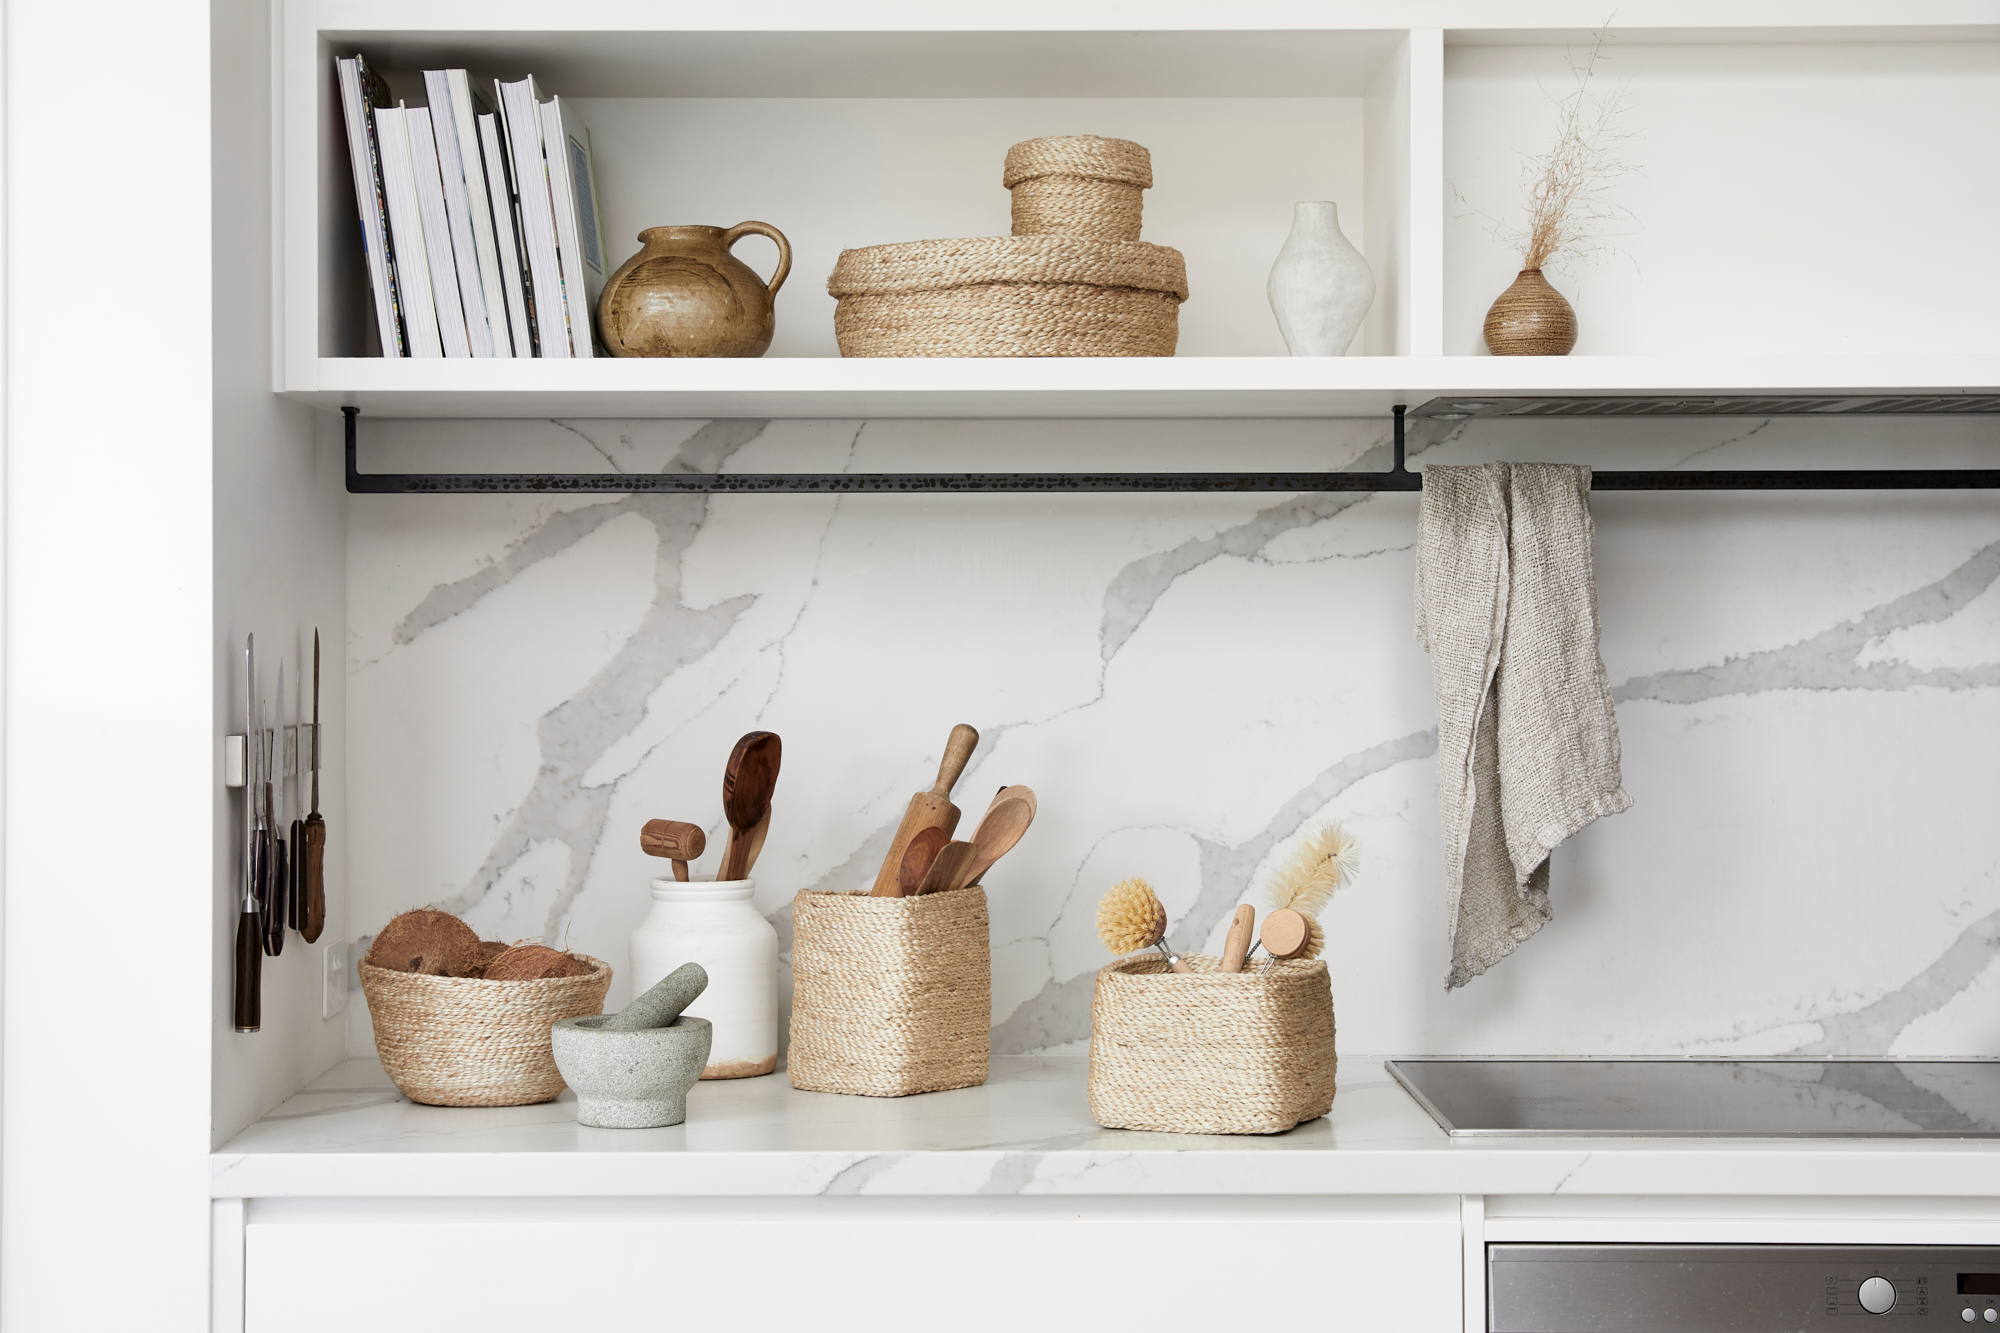 Woven baskets styled in a kitchen